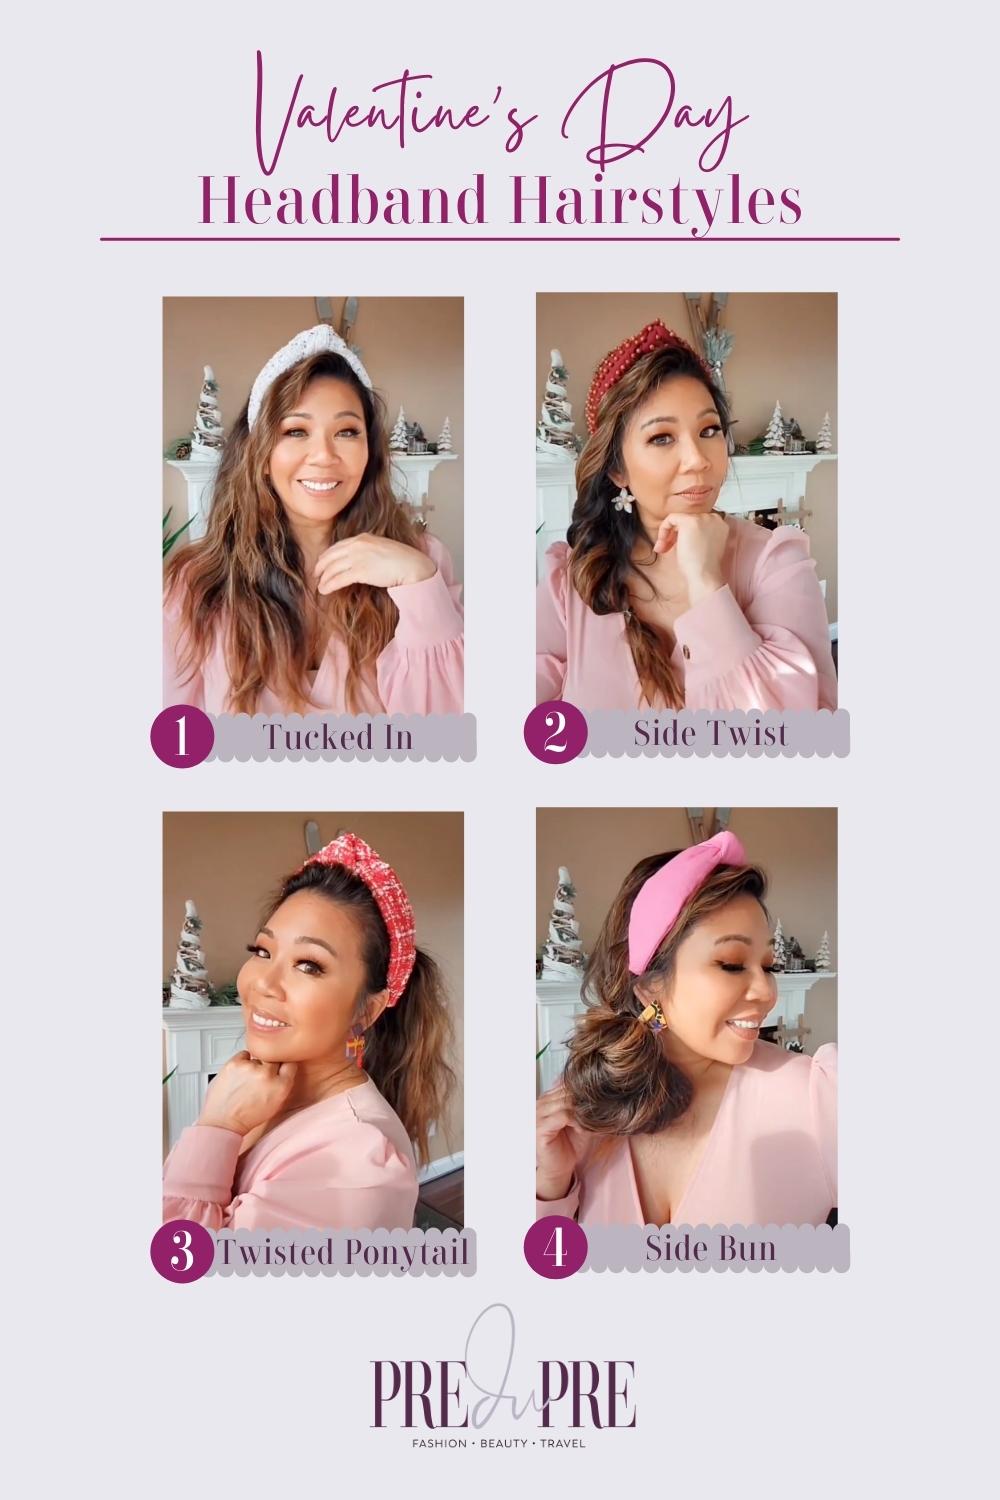 Collage of four photos of a female showcasing different ways to style hair with a headband. Shown clockwise: tucked in, side twist, twisted ponytail, and side bun.